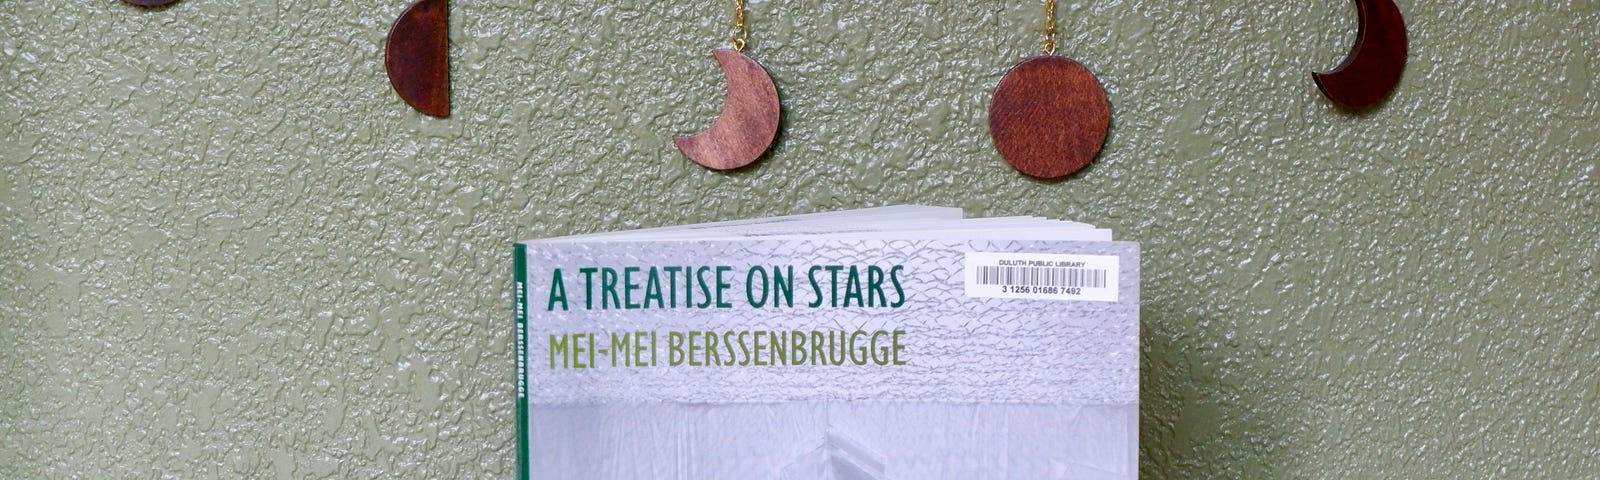 A book with a white cover and green lettering stands on a wooden shelf. Behind the book, a wooden moon phase garland is strung along a green wall.